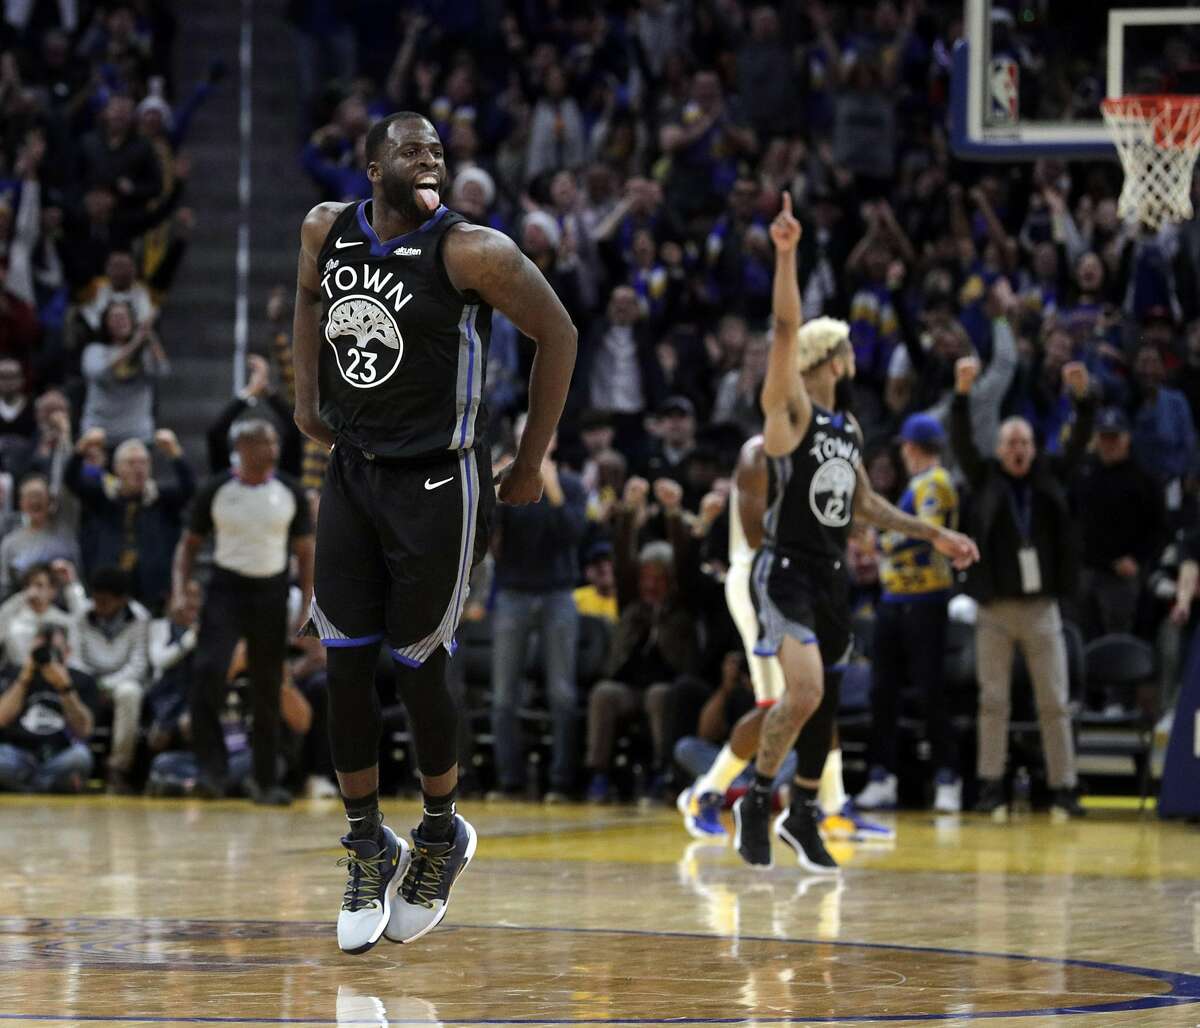 Draymond Green (23) reacts after he hit a three pointer late in the second half as the Golden State Warriors played the Houston Rockets at Chase Center in San Francisco, Calif., on Wednesday, December 25, 2019.